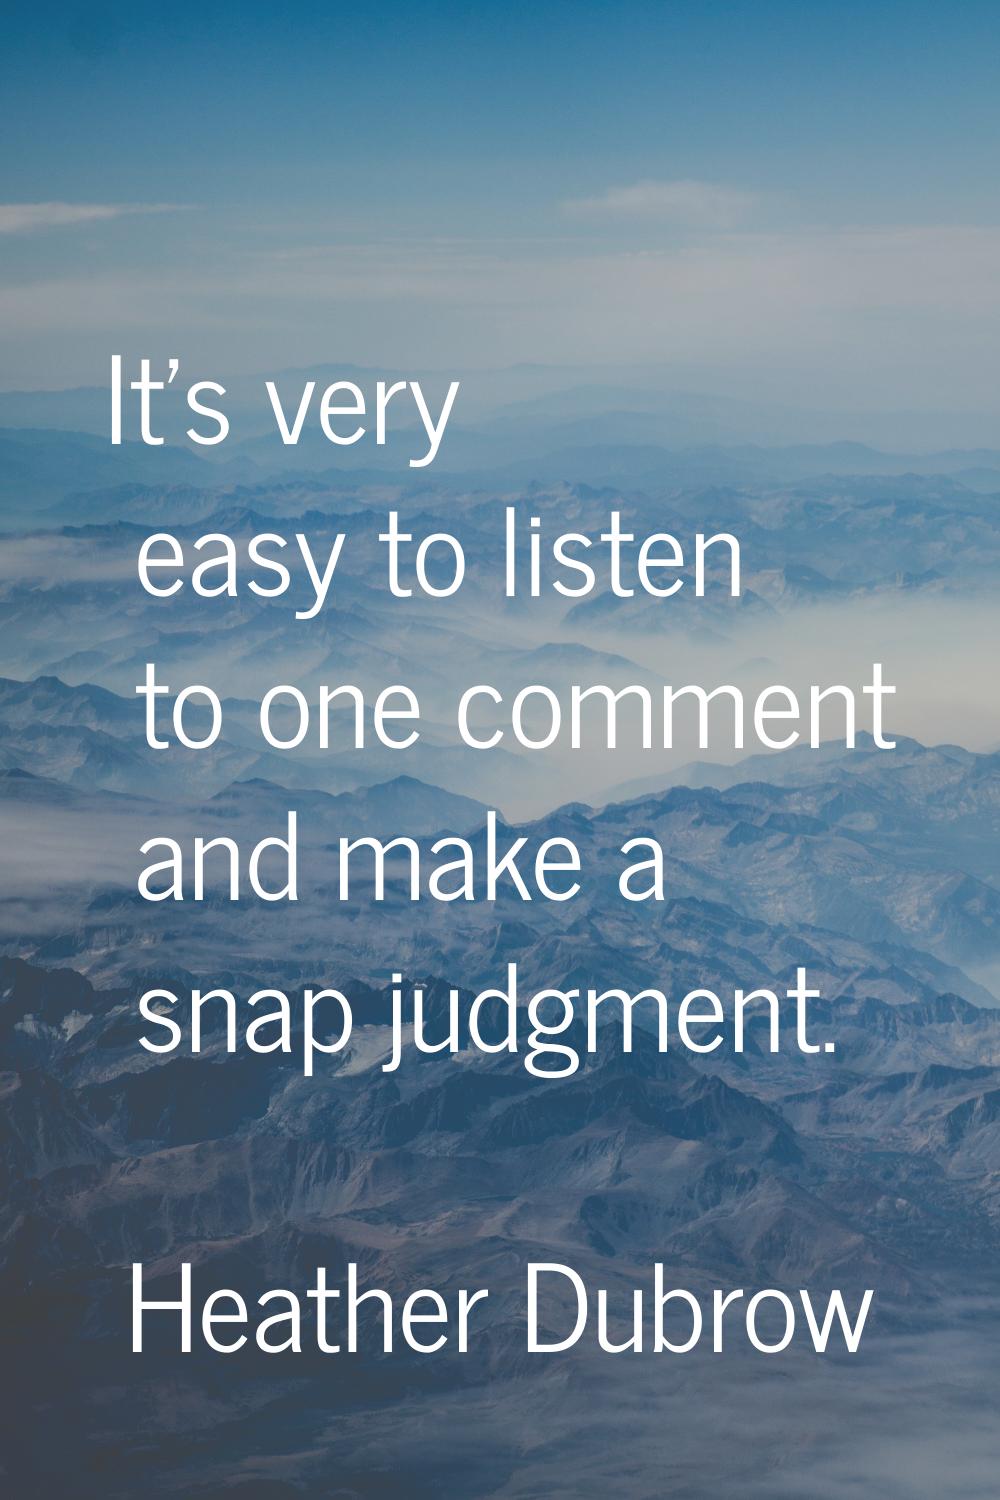 It's very easy to listen to one comment and make a snap judgment.